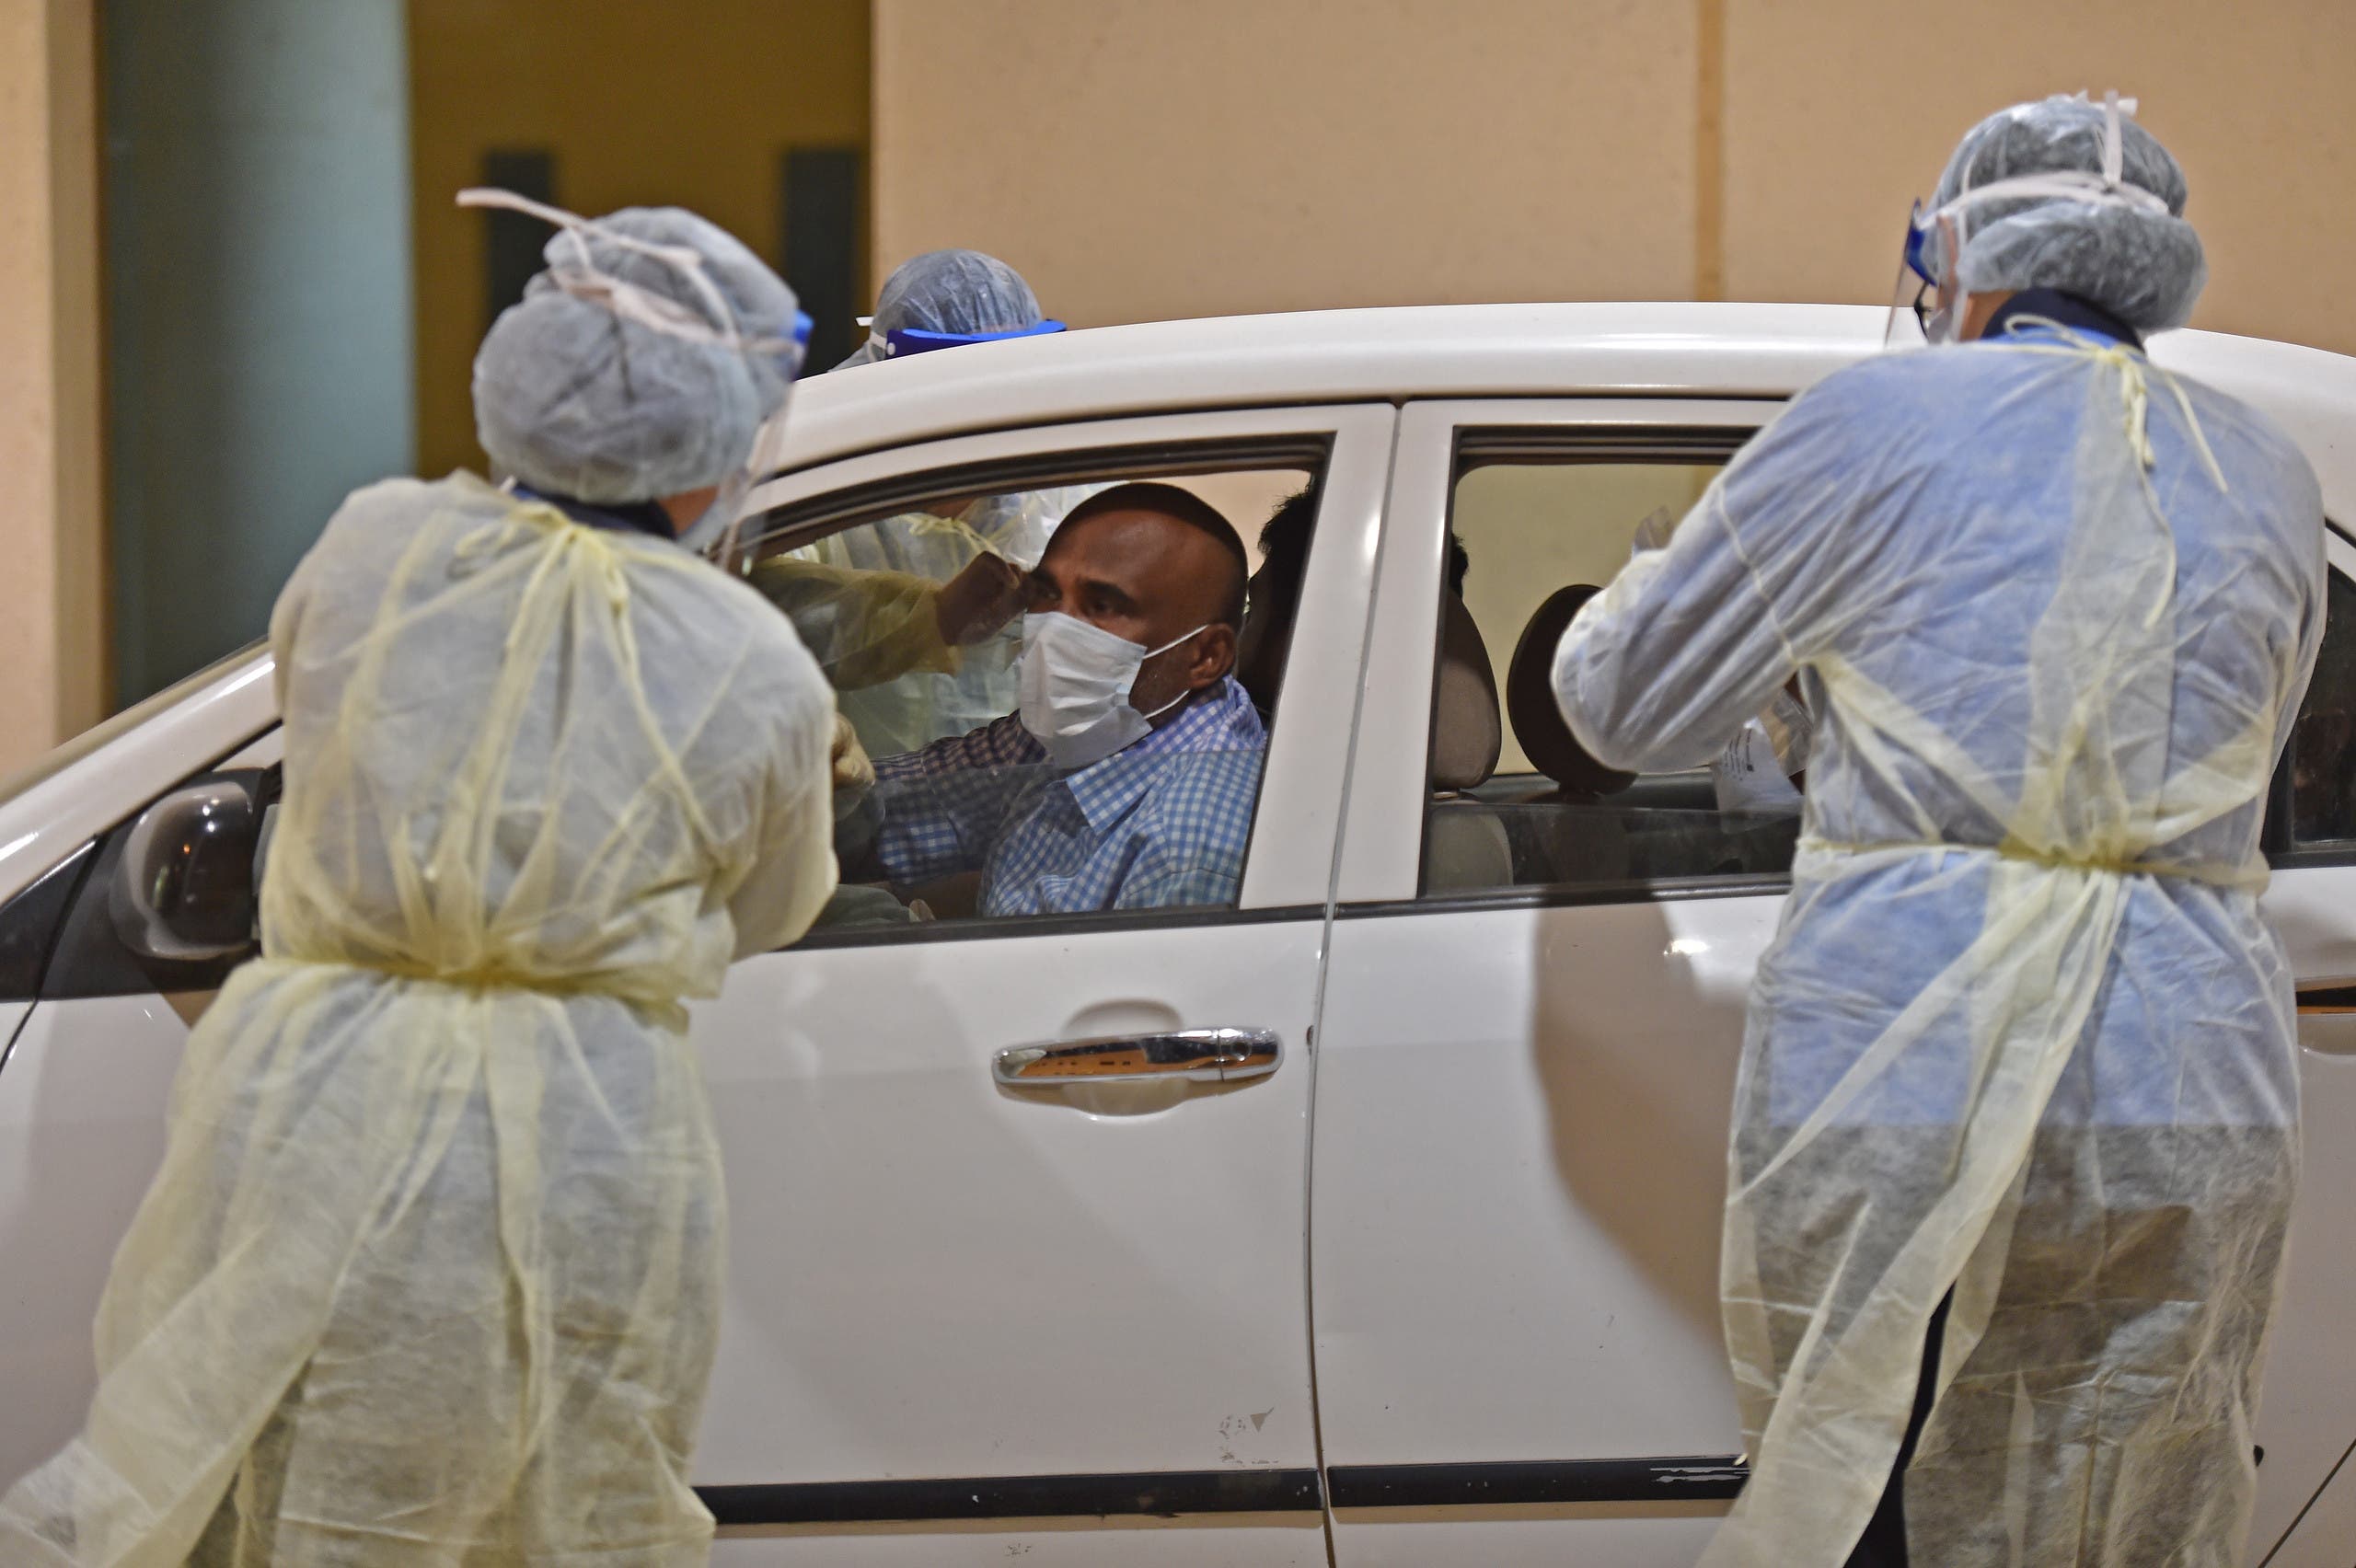 Health workers perform a nose swab test during a drive through coronavirus test campaign held in Diriyah hospital in the Saudi capital Riyadh. (File photo: AFP)